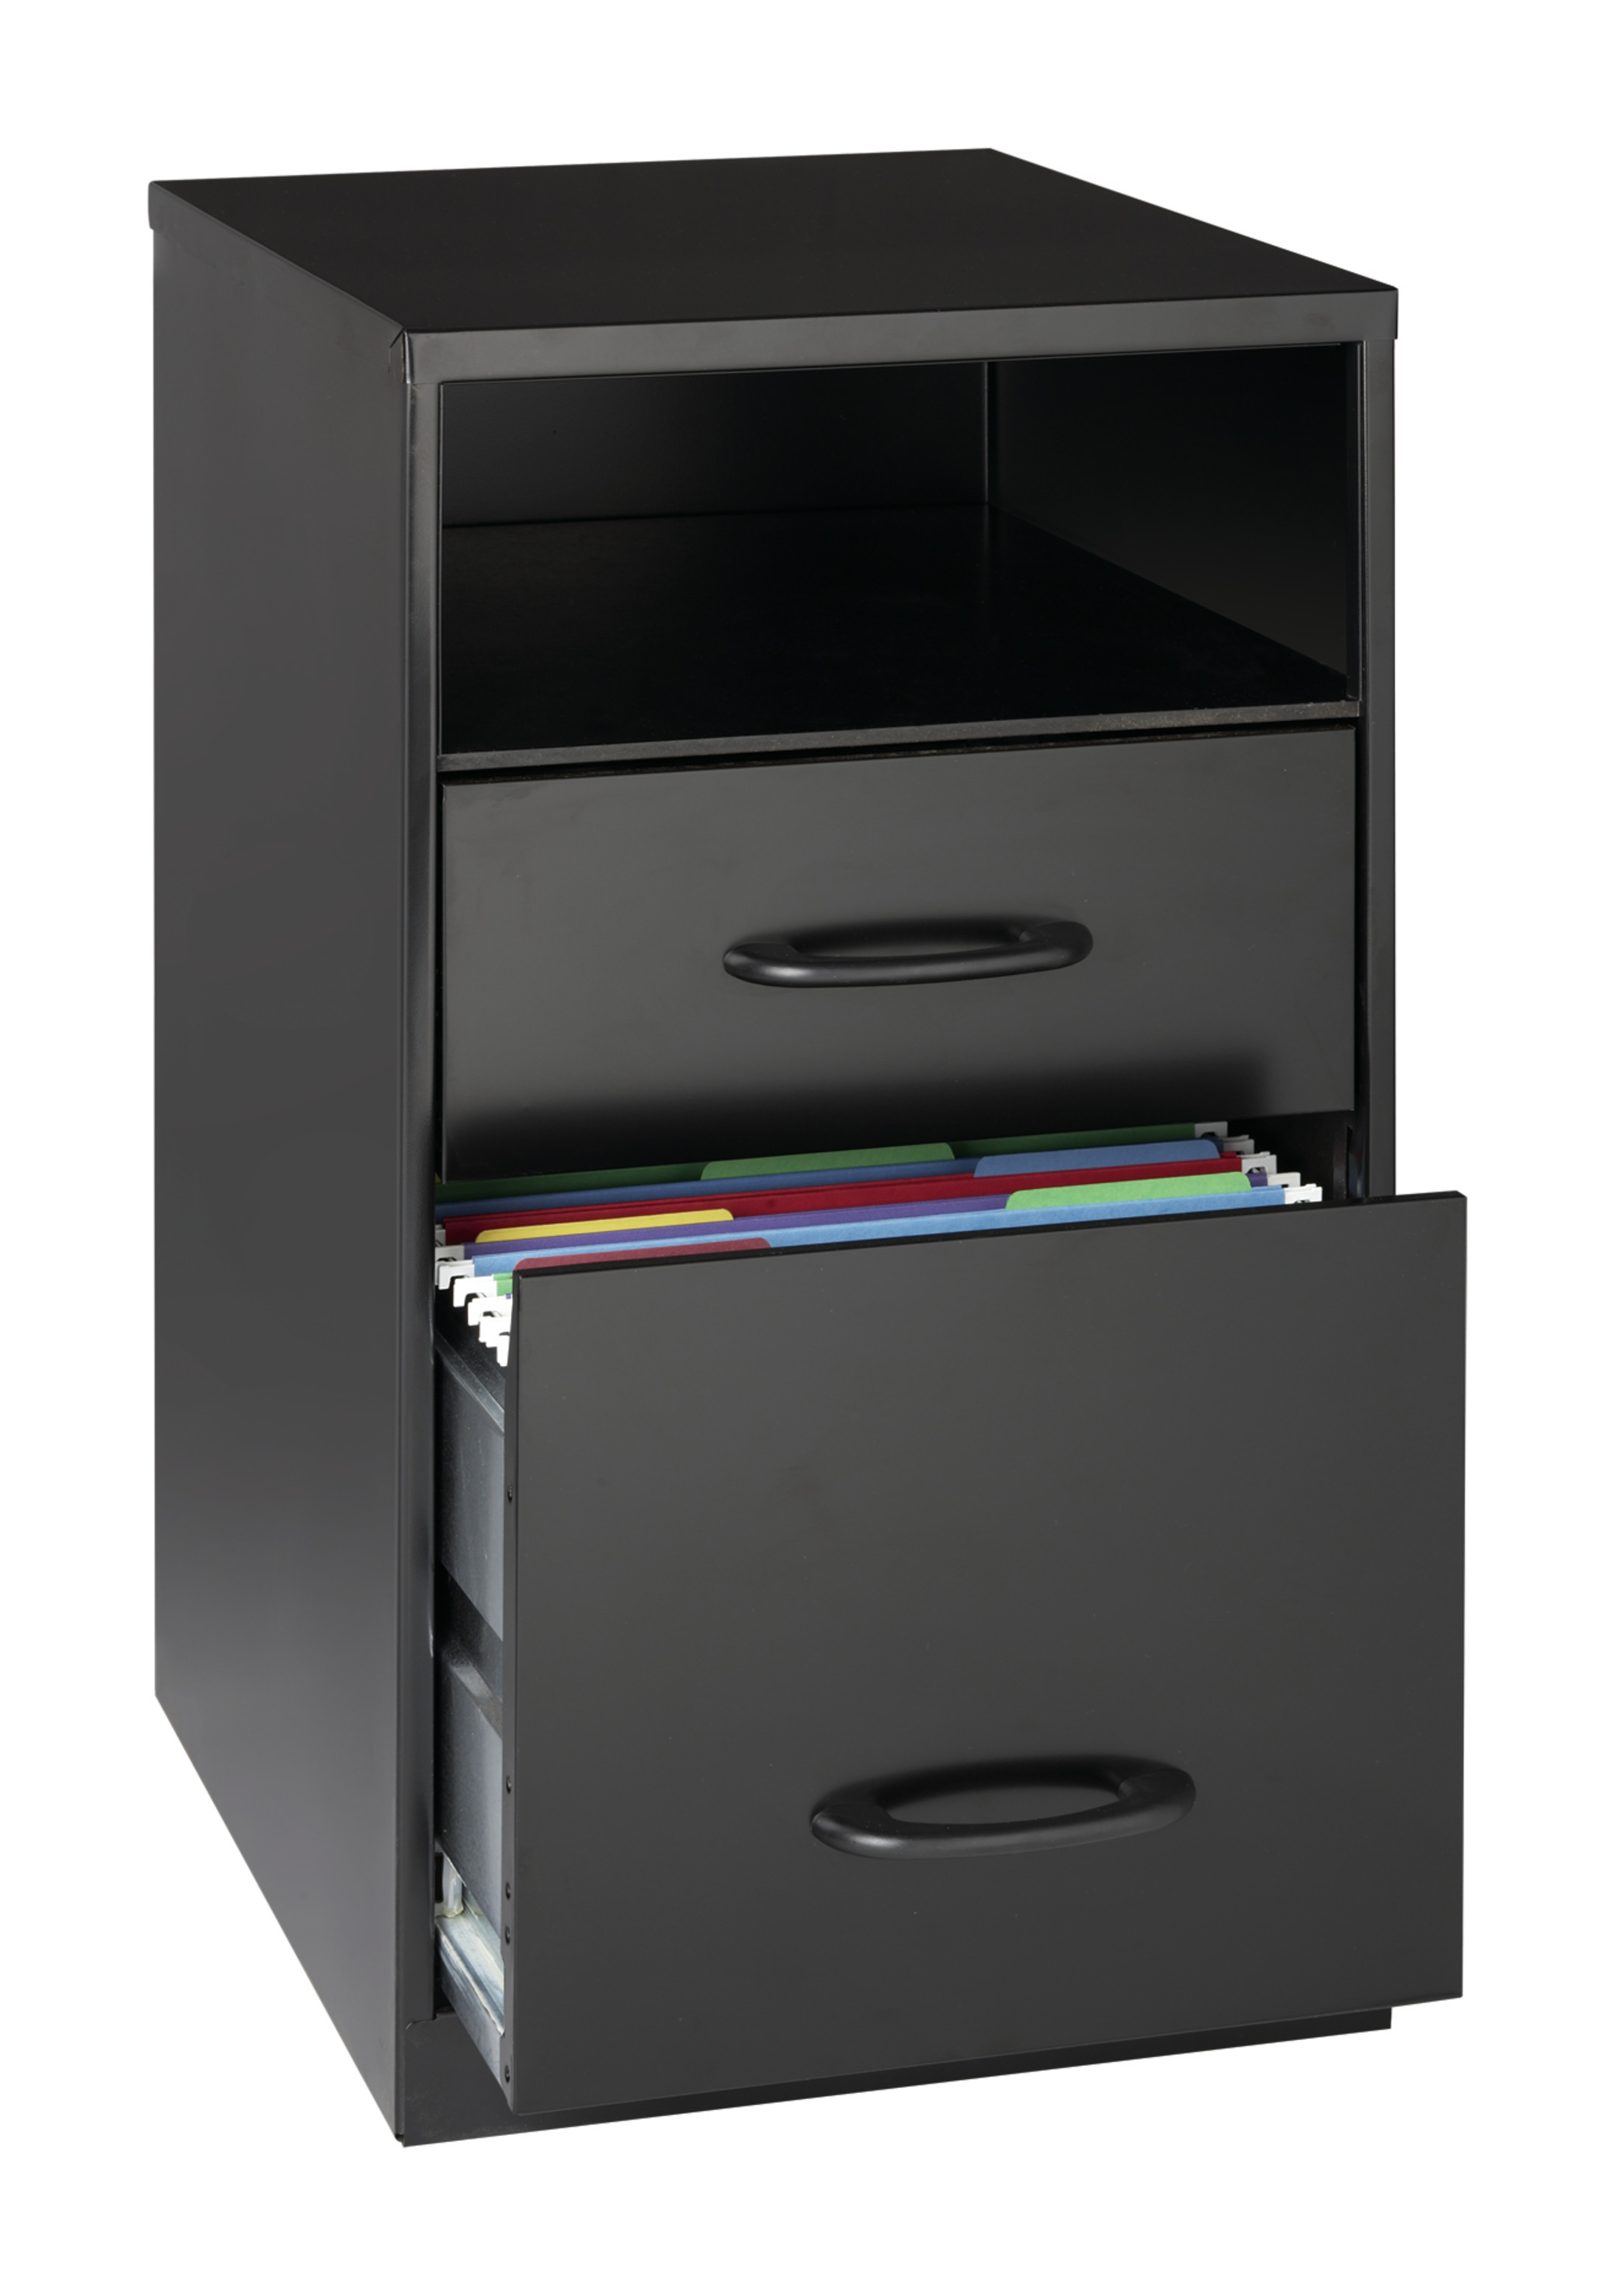 Space Solutions 18in. 2 Drawer Organizer, Black - image 1 of 2